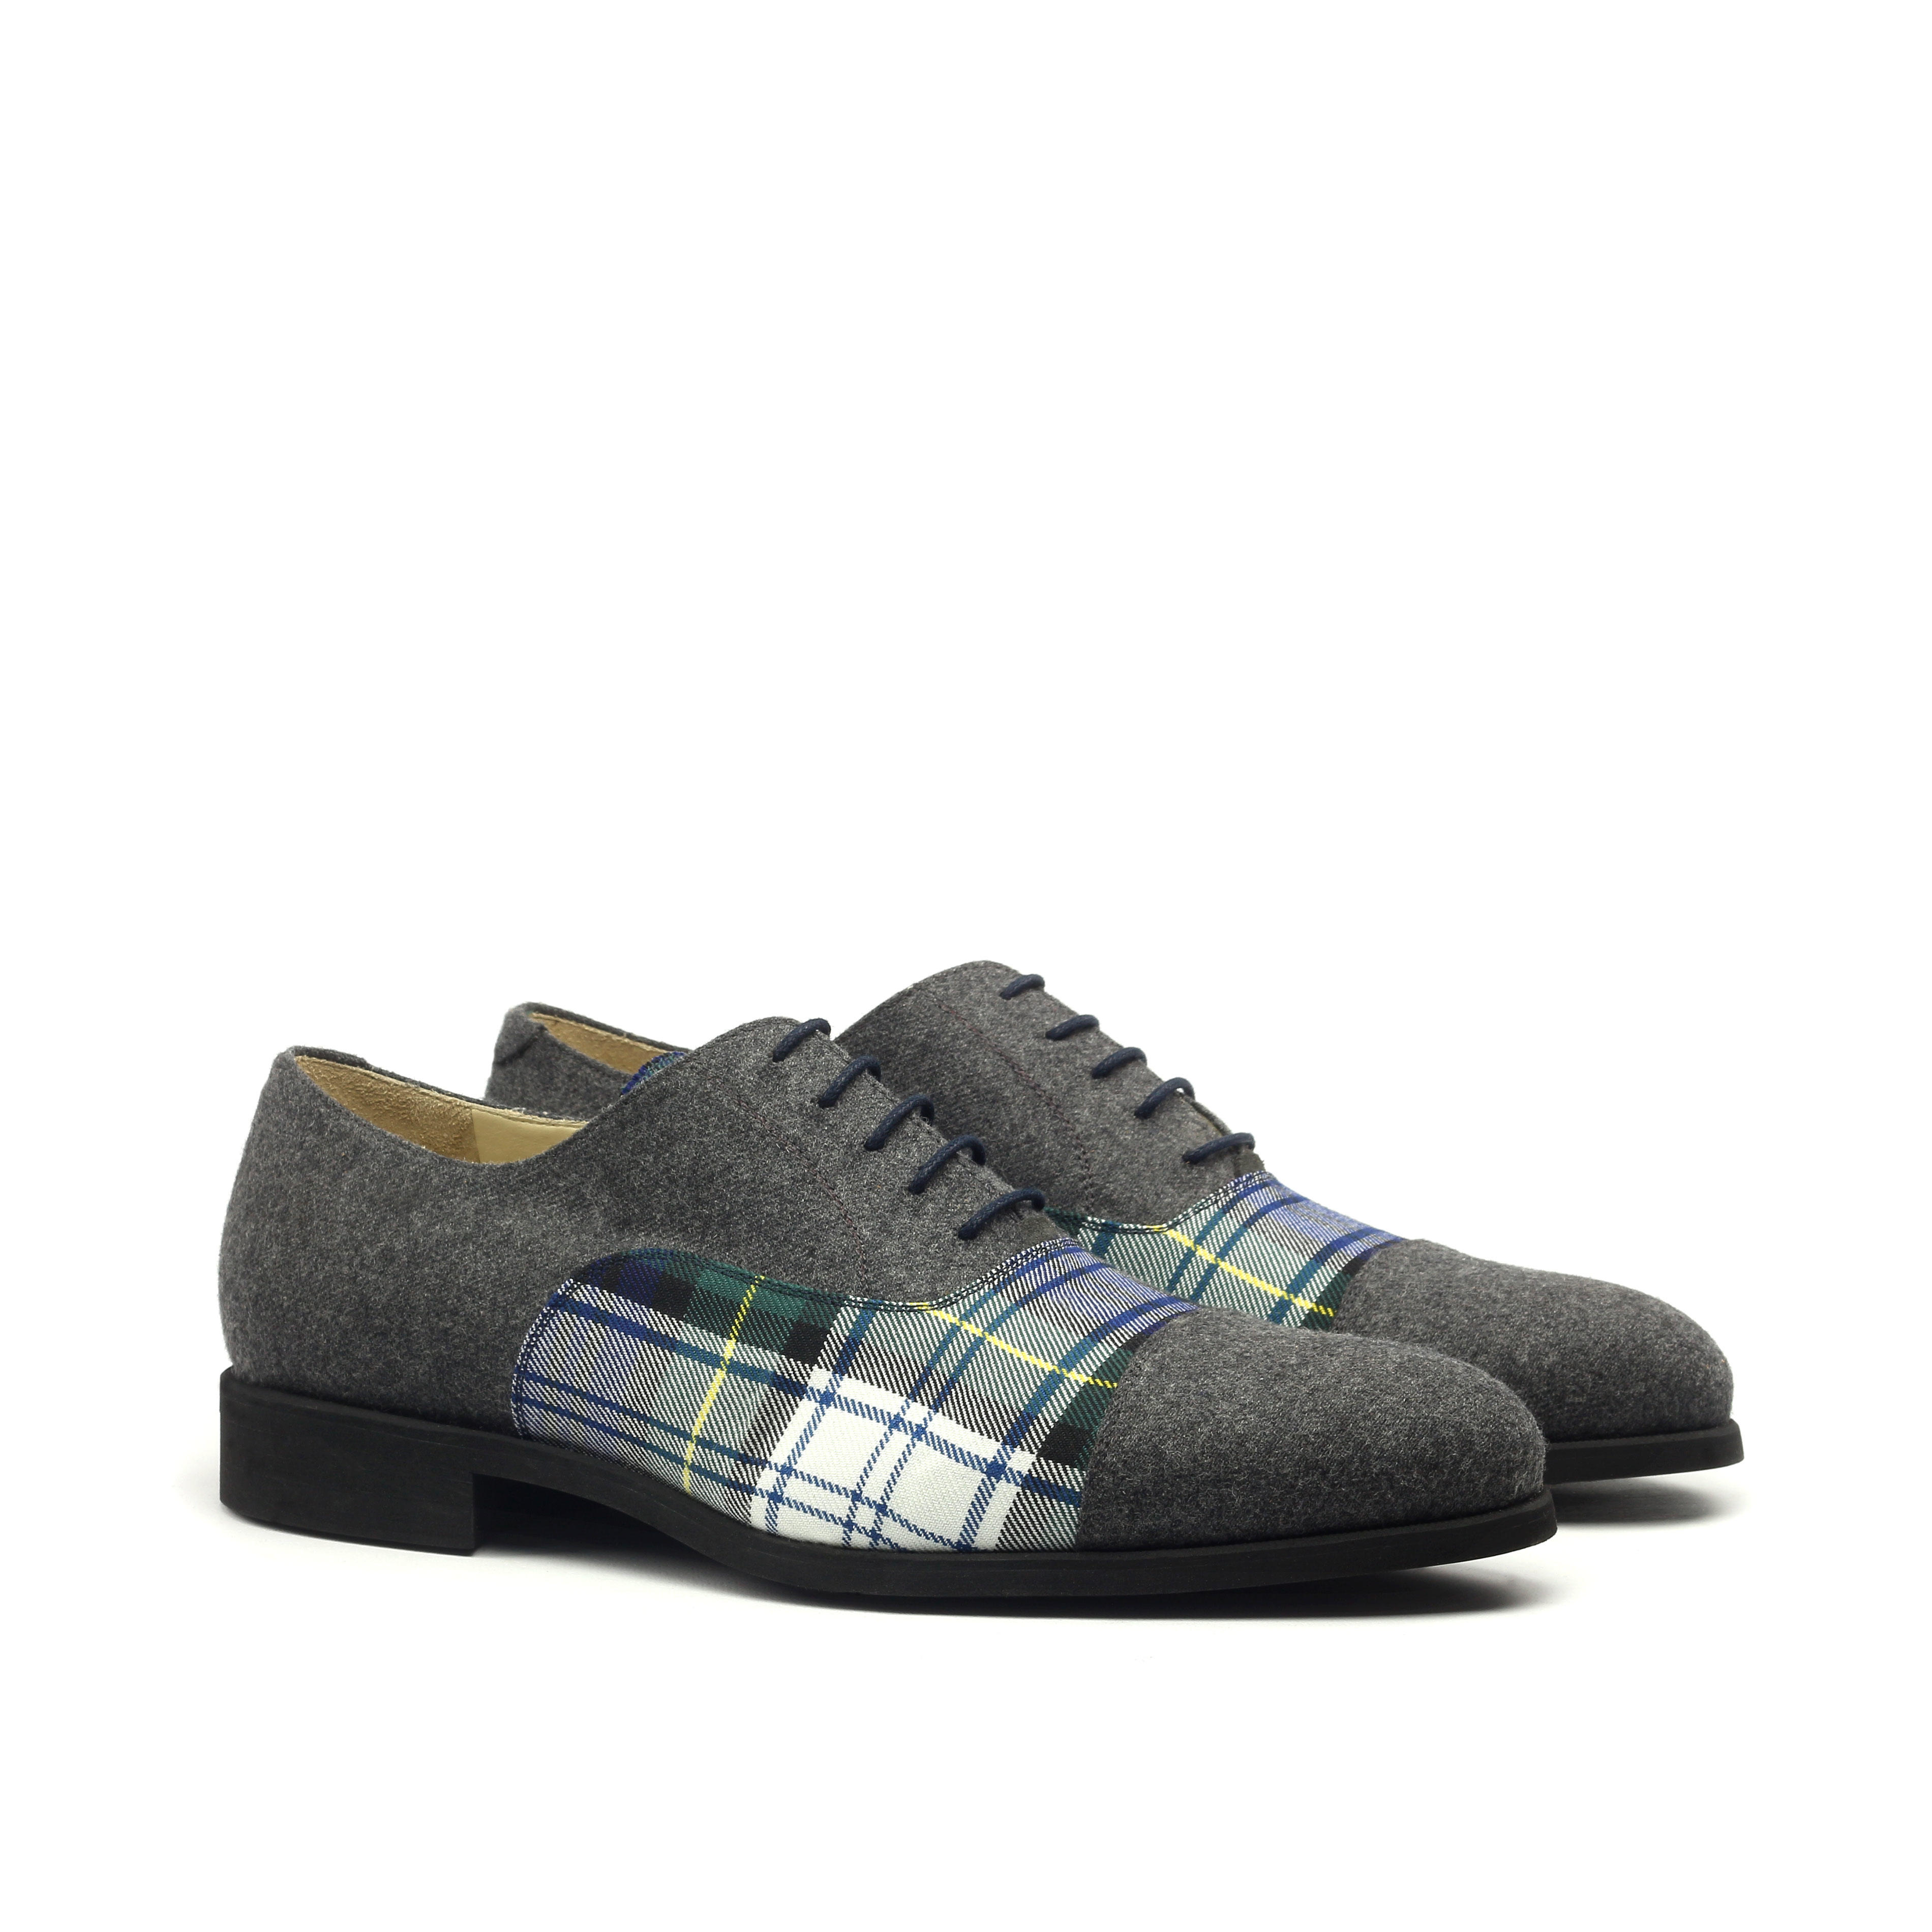 MANOR OF LONDON 'The Oxford' Grey Flannel & Tartan Shoe Luxury Custom Initials Monogrammed Front Side View